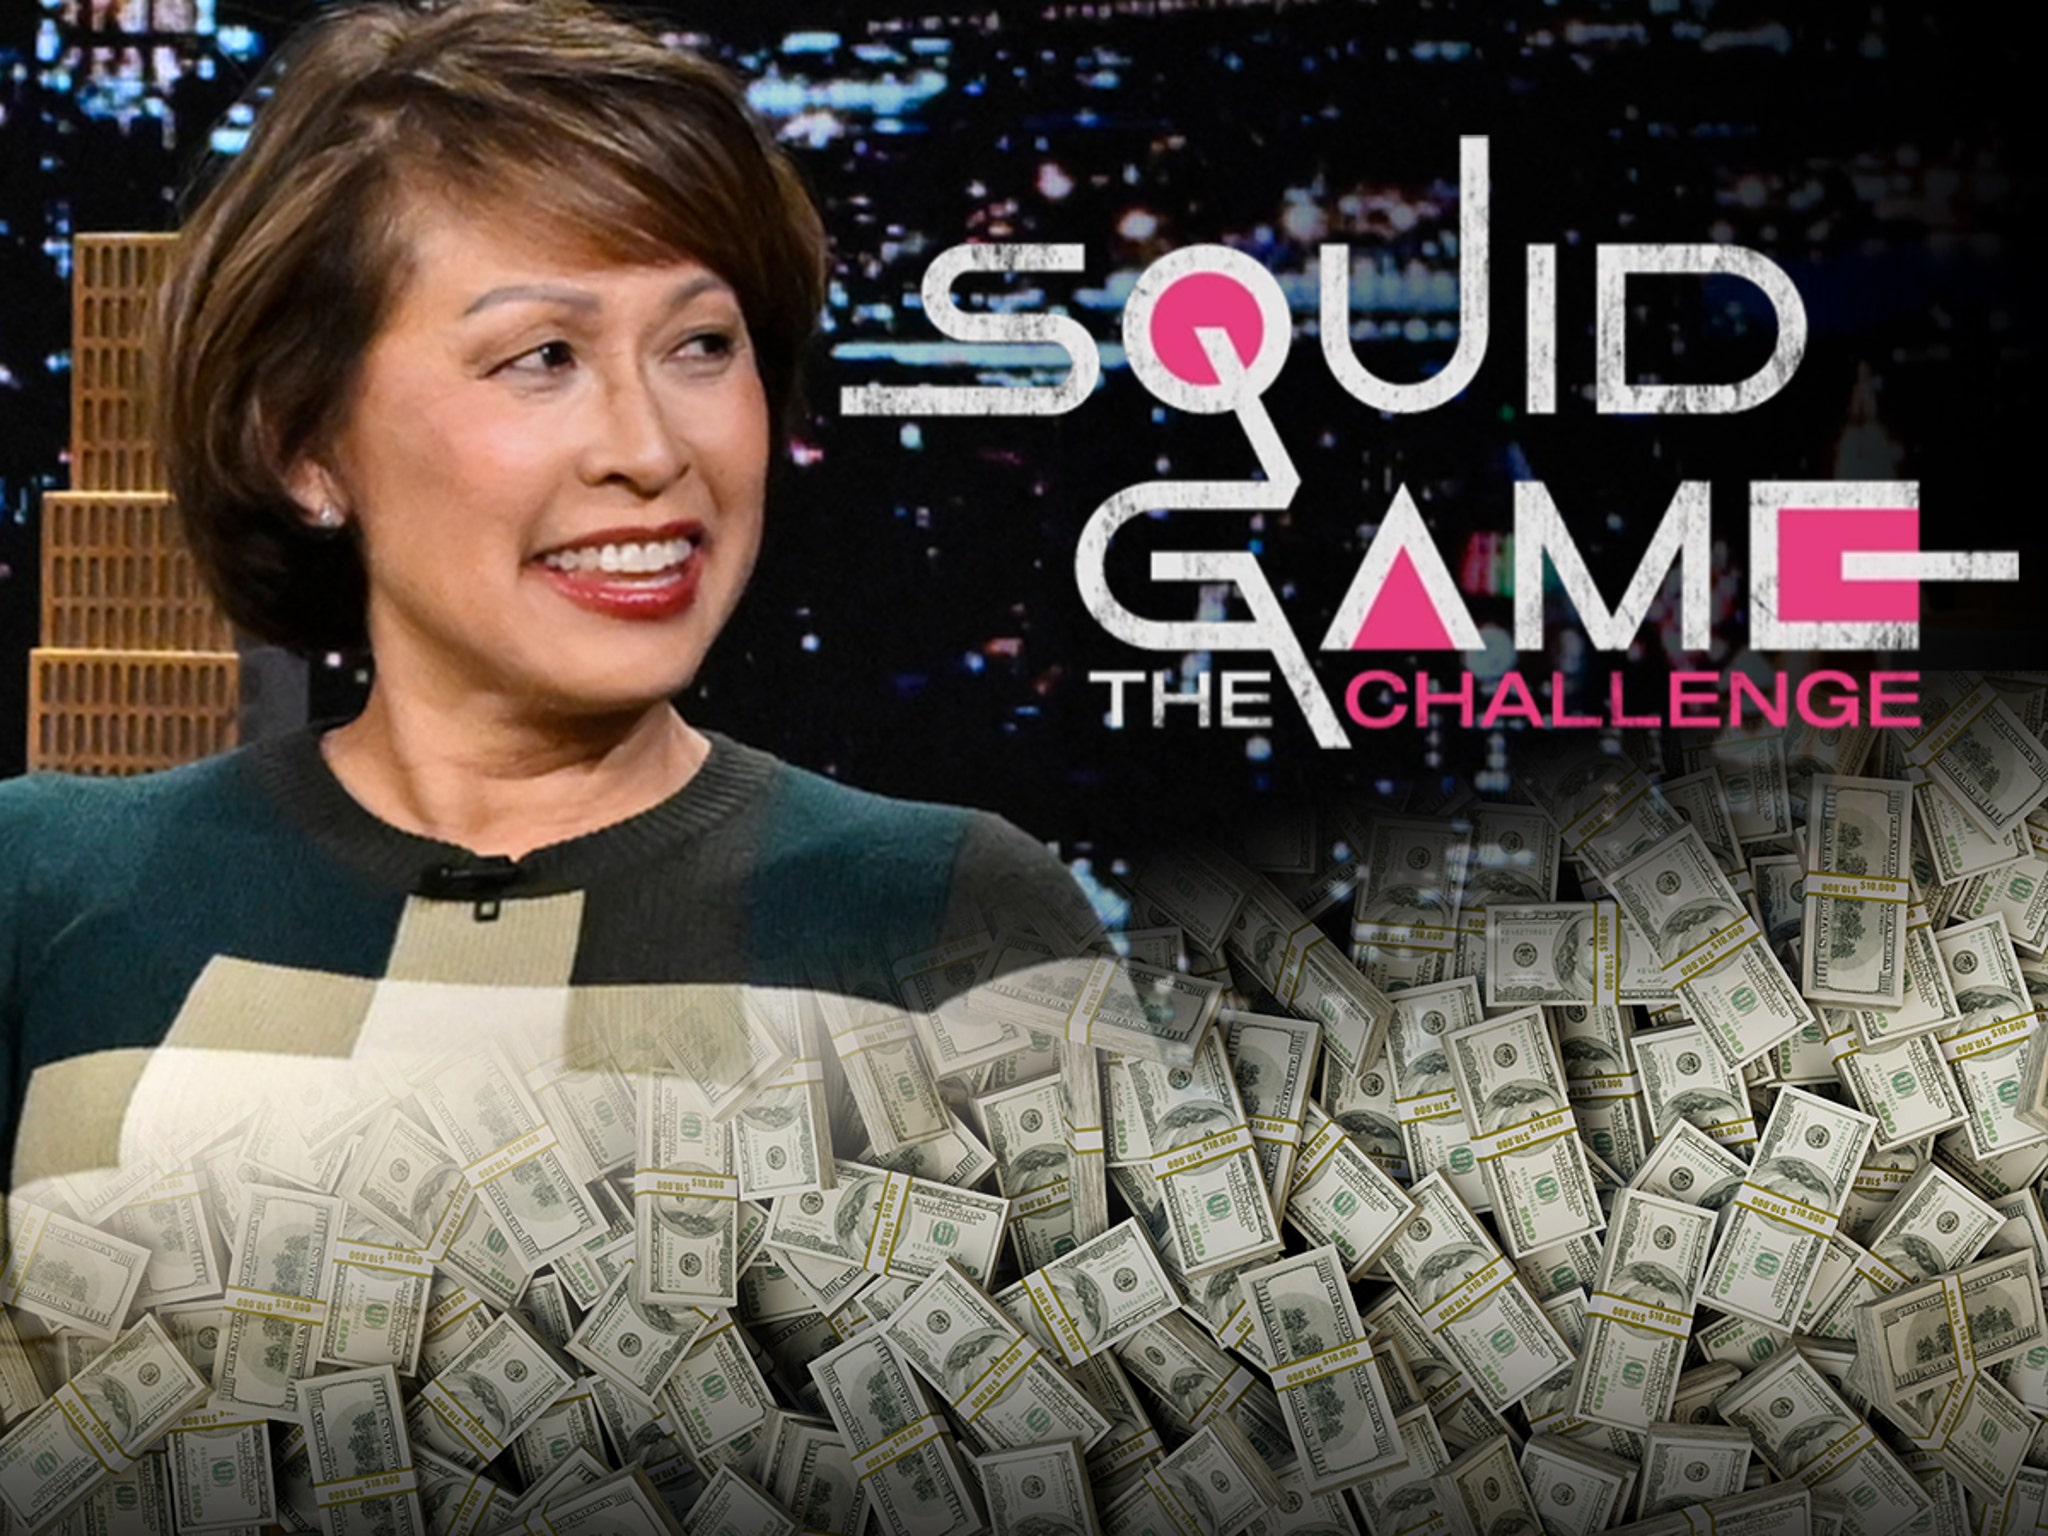 squid game challenge: 10 months on, Squid Game: The Challenge winner yet to  receive $4.56 million prize money - The Economic Times